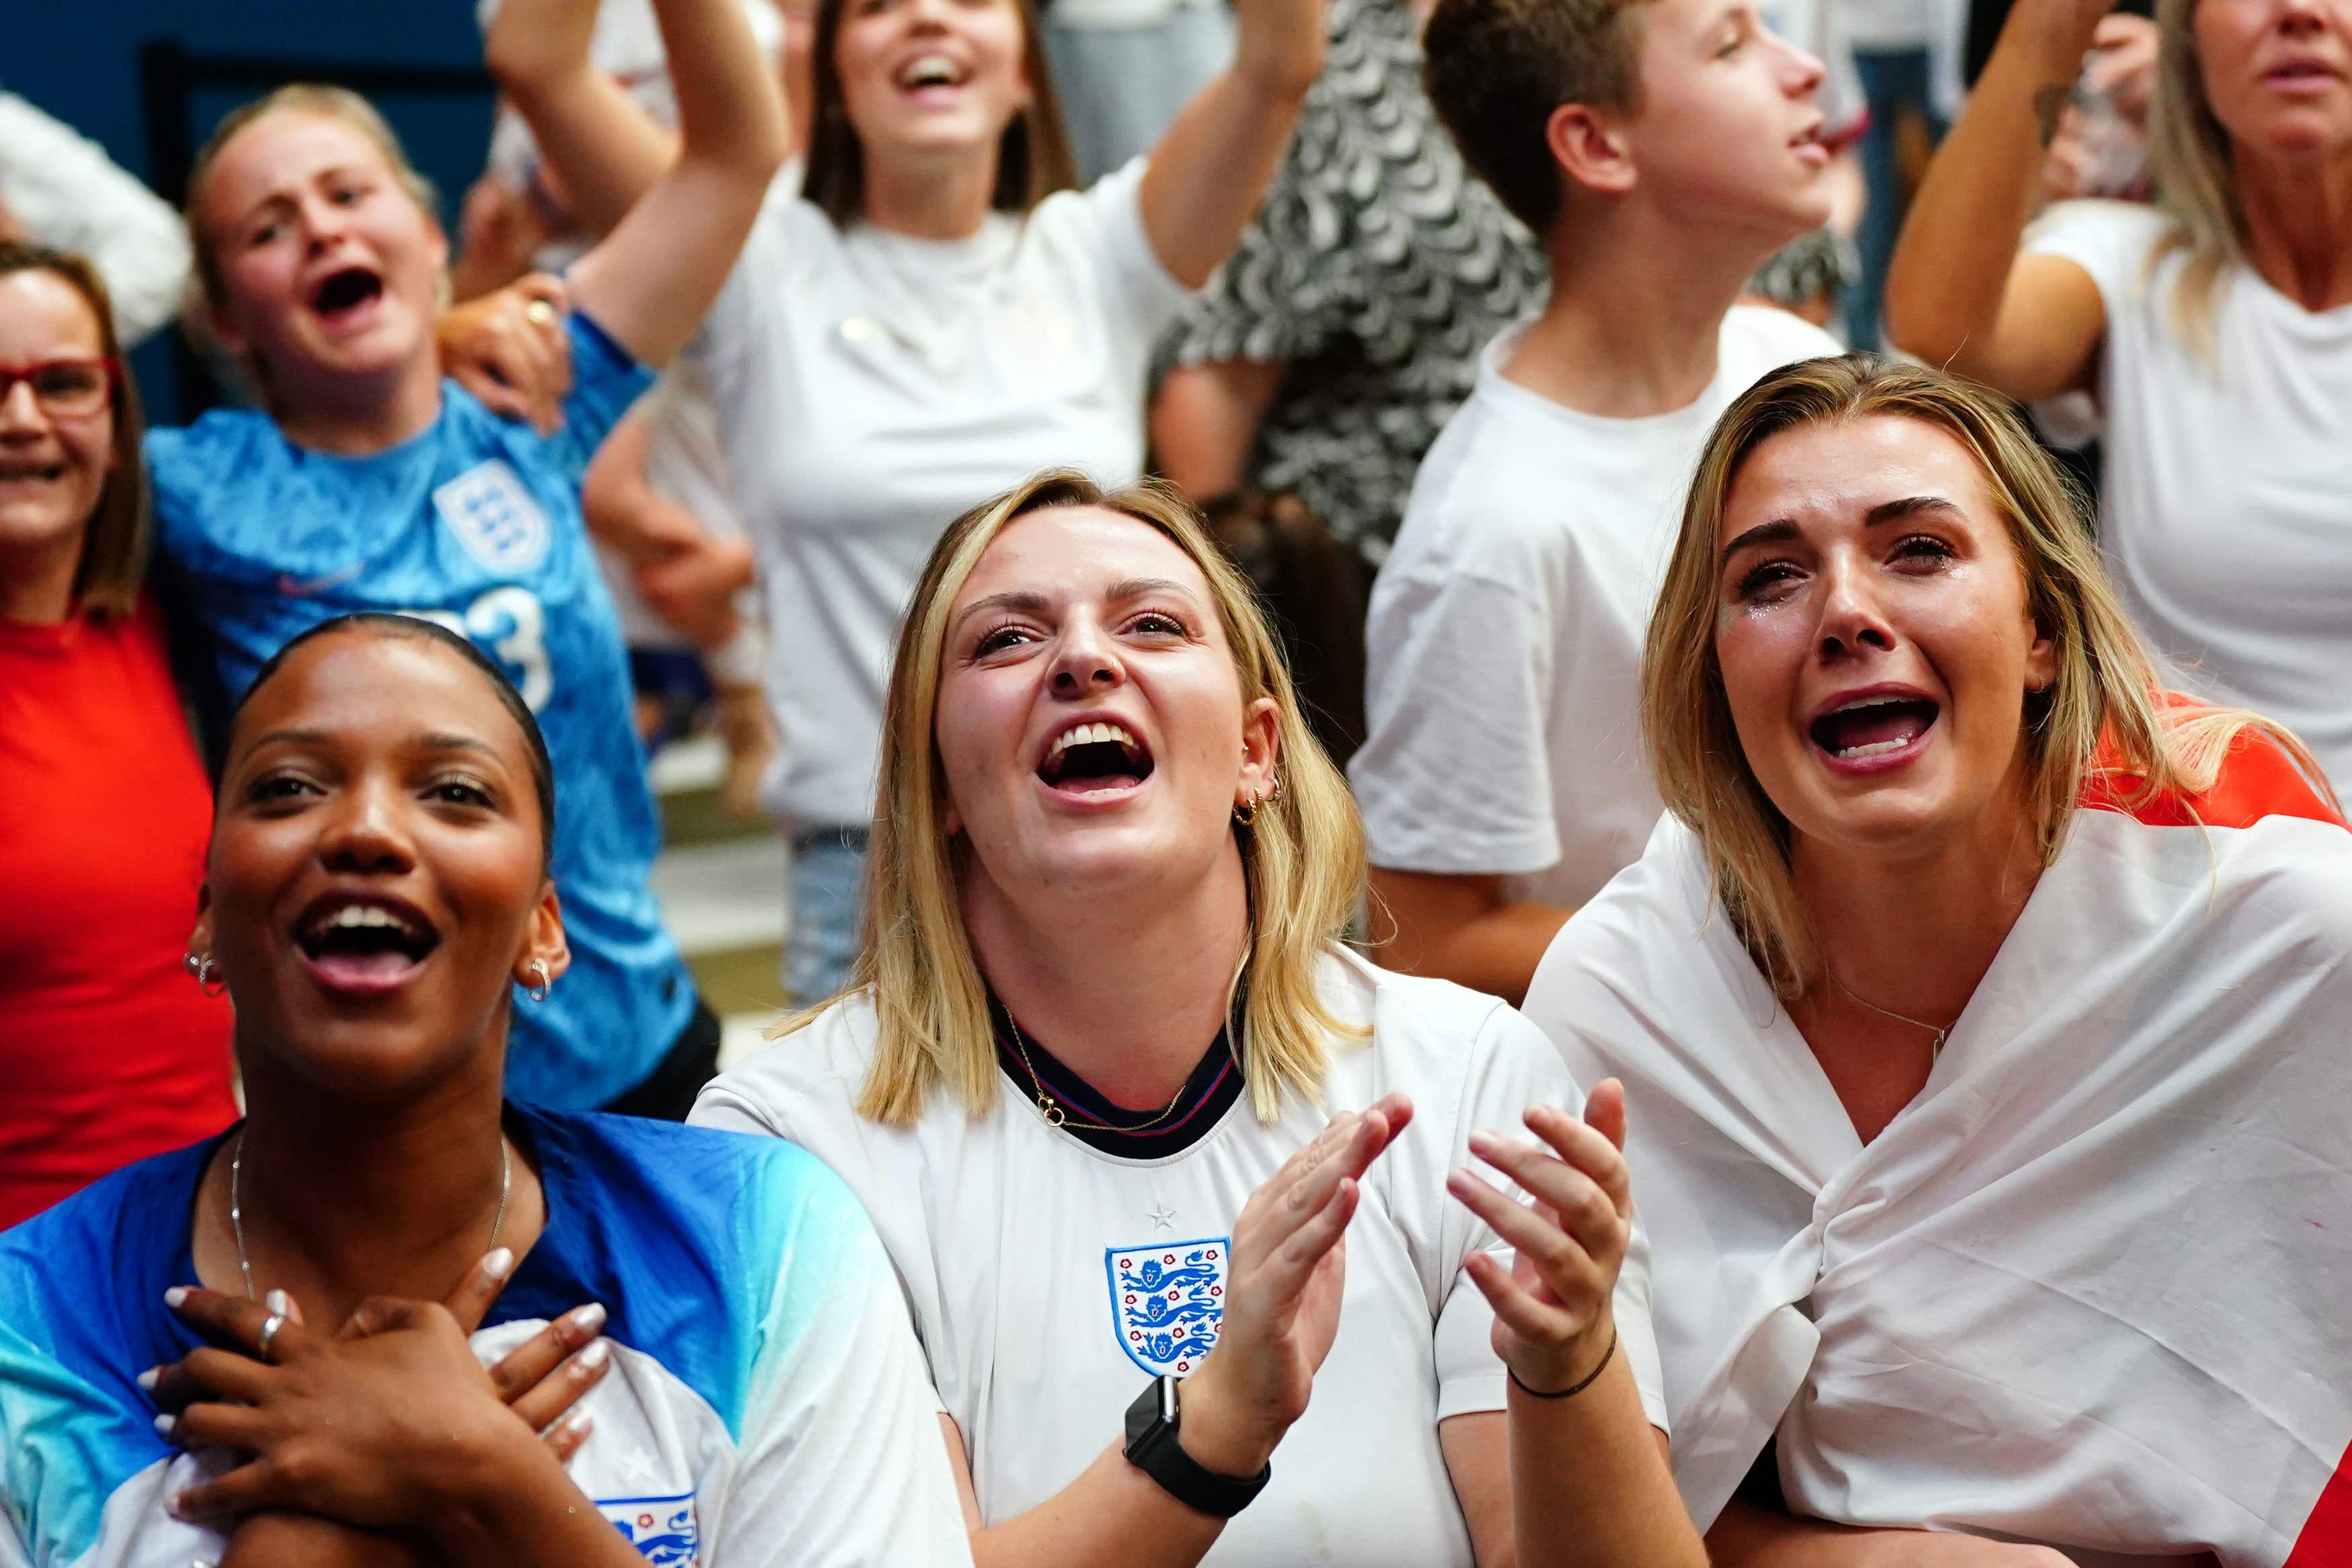 An average of 4.6 million tuned in to watch England beat Australia on Wednesday